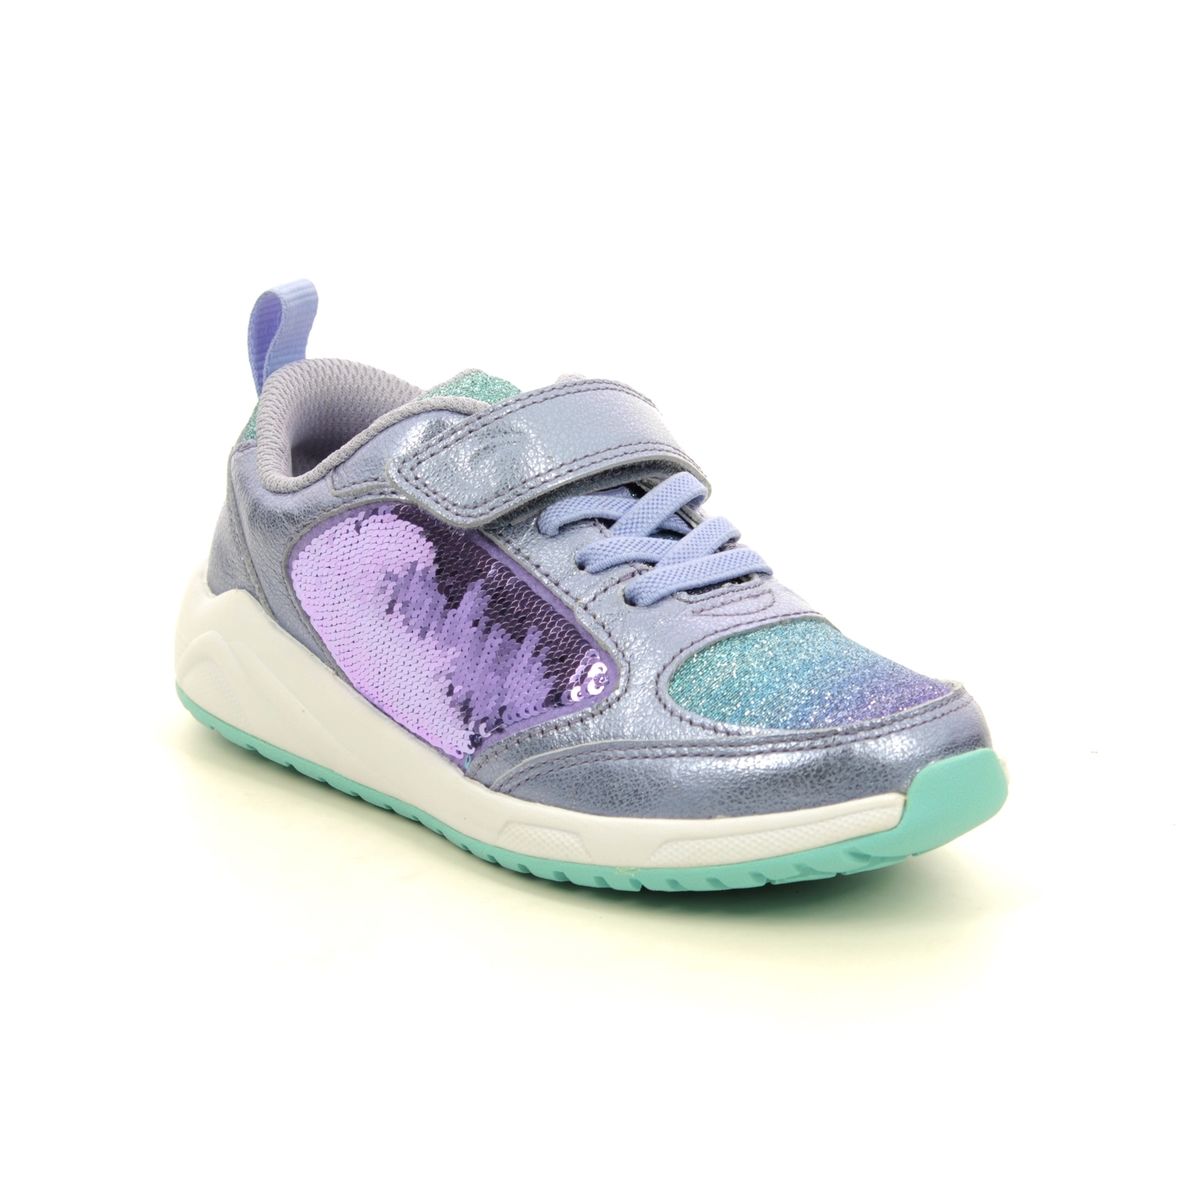 Clarks Aeon Flex K Lilac Kids Girls Trainers 541146F In Size 2.5 In Plain Lilac F Width Fitting Regular Fit For kids